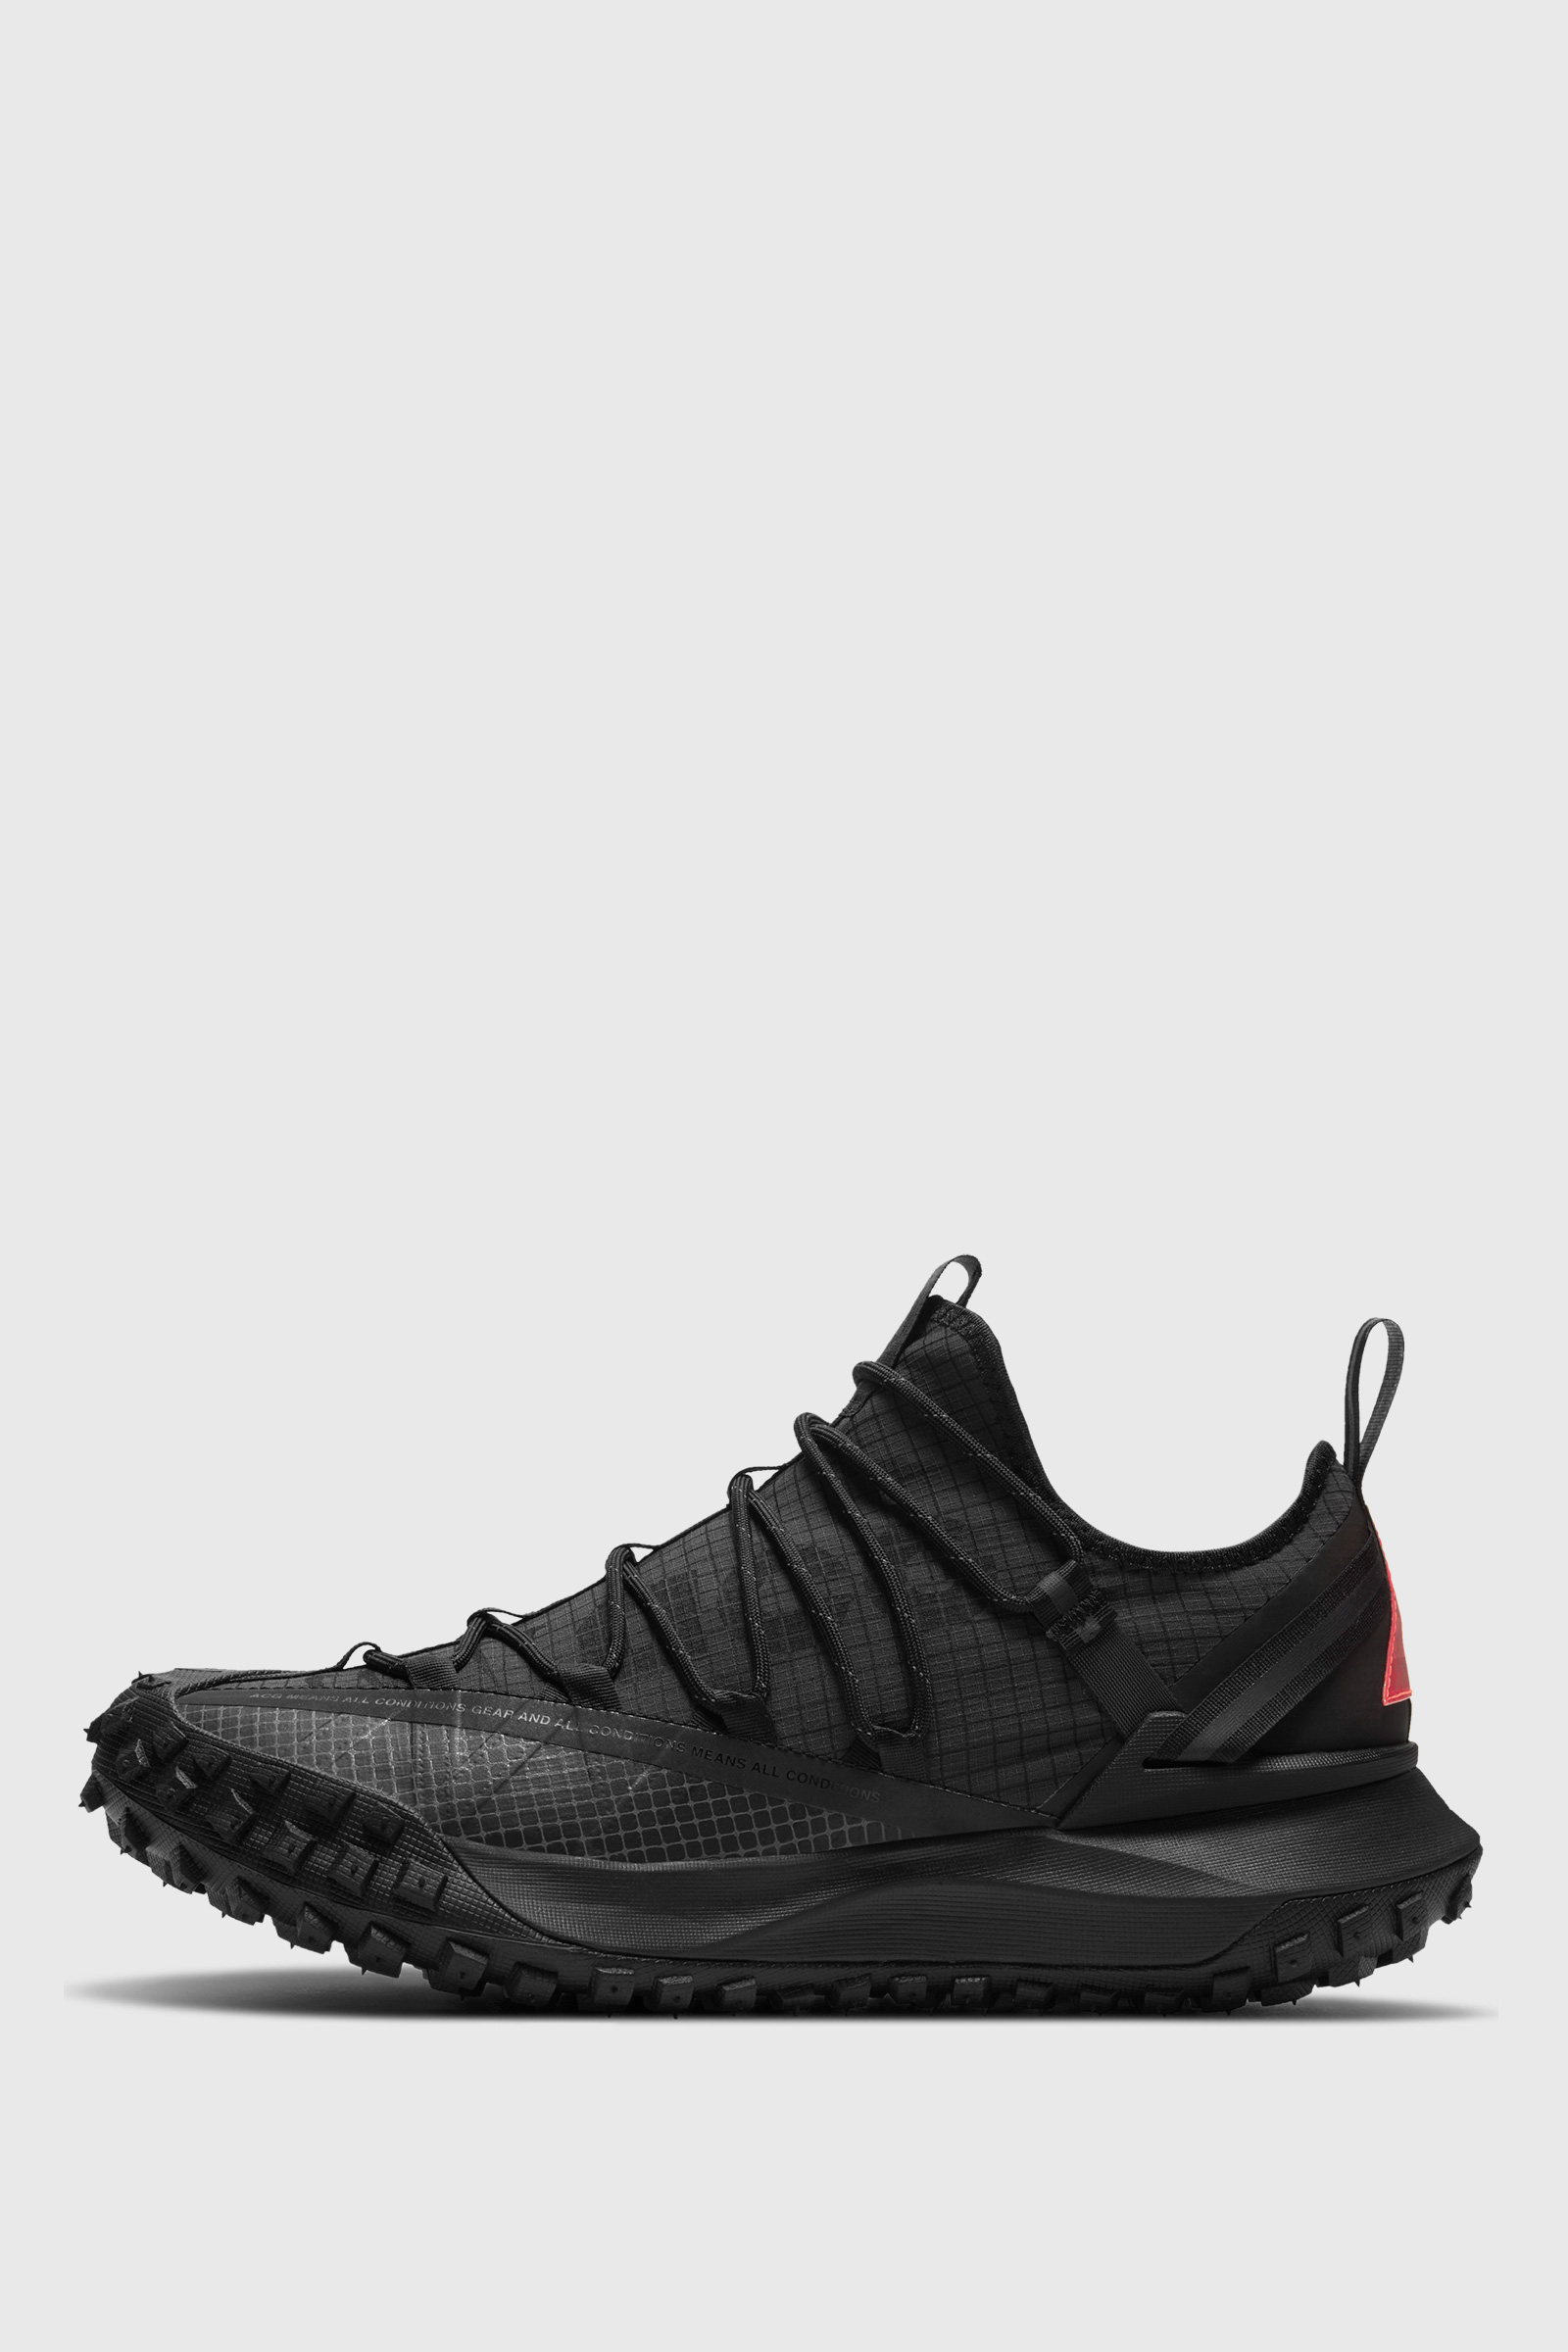 Nike ACG Mountain Fly Anthracite/black (001) | WoodWood.com